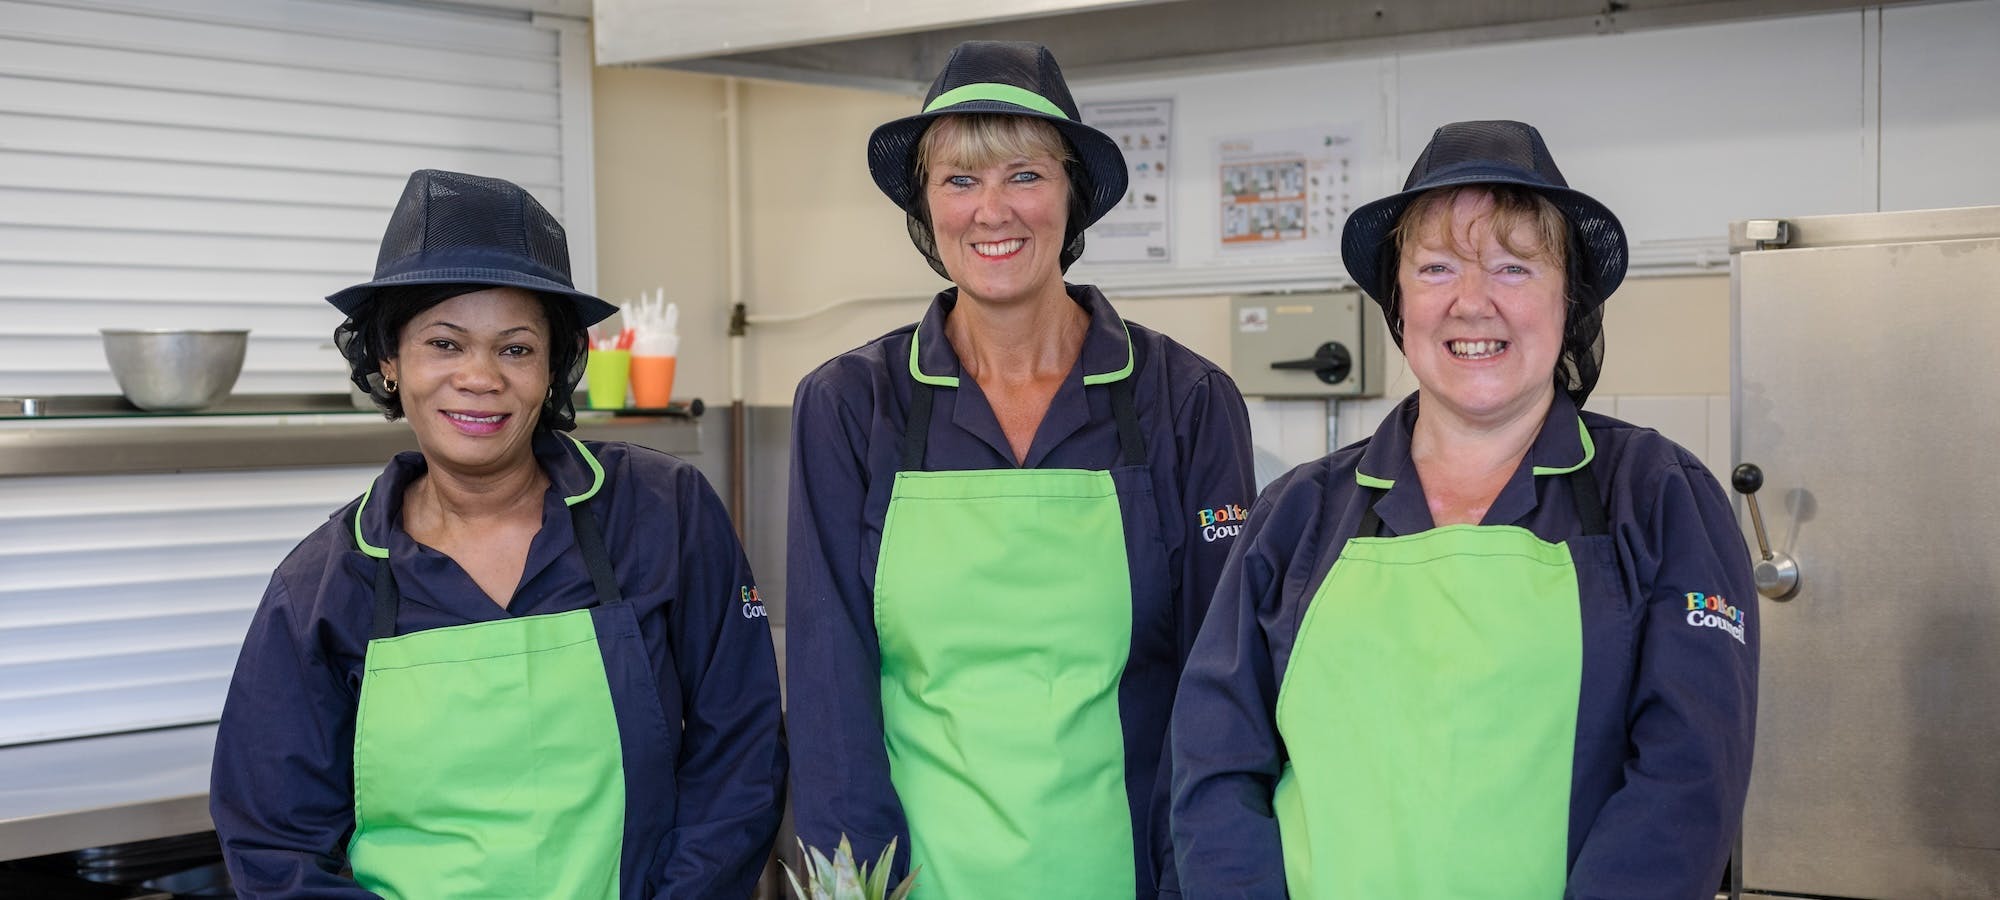 Image of three smiling chefs wearing green aprons in a kichen.